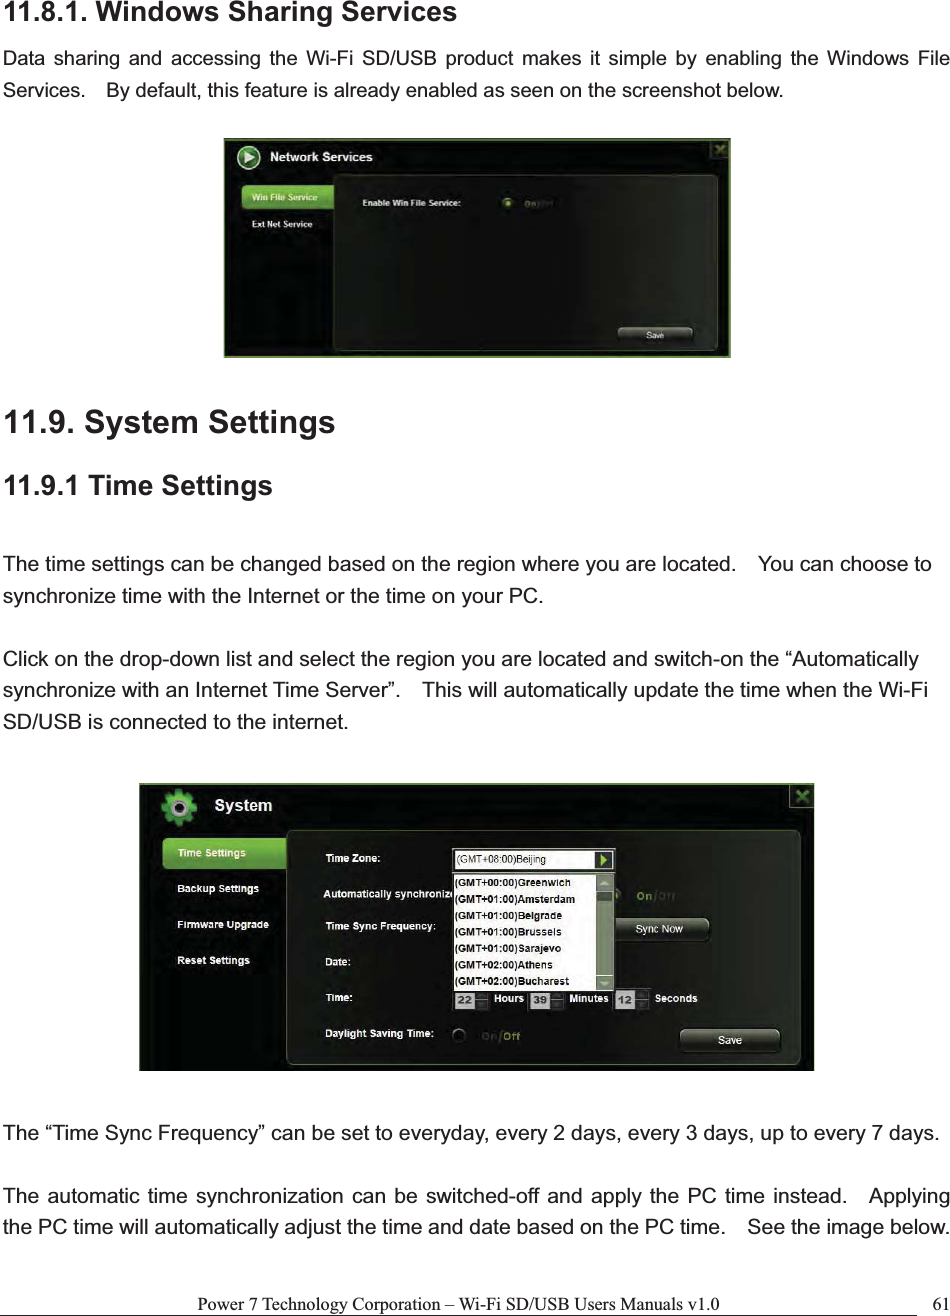 Power 7 Technology Corporation – Wi-Fi SD/USB Users Manuals v1.0  6111.8.1. Windows Sharing Services Data sharing and accessing the Wi-Fi SD/USB product makes it simple by enabling the Windows File Services.    By default, this feature is already enabled as seen on the screenshot below. 11.9. System Settings 11.9.1 Time Settings The time settings can be changed based on the region where you are located.    You can choose to synchronize time with the Internet or the time on your PC.   Click on the drop-down list and select the region you are located and switch-on the “Automatically synchronize with an Internet Time Server”.    This will automatically update the time when the Wi-Fi SD/USB is connected to the internet.     The “Time Sync Frequency” can be set to everyday, every 2 days, every 3 days, up to every 7 days. The automatic time synchronization can be switched-off and apply the PC time instead.    Applying the PC time will automatically adjust the time and date based on the PC time.    See the image below. 